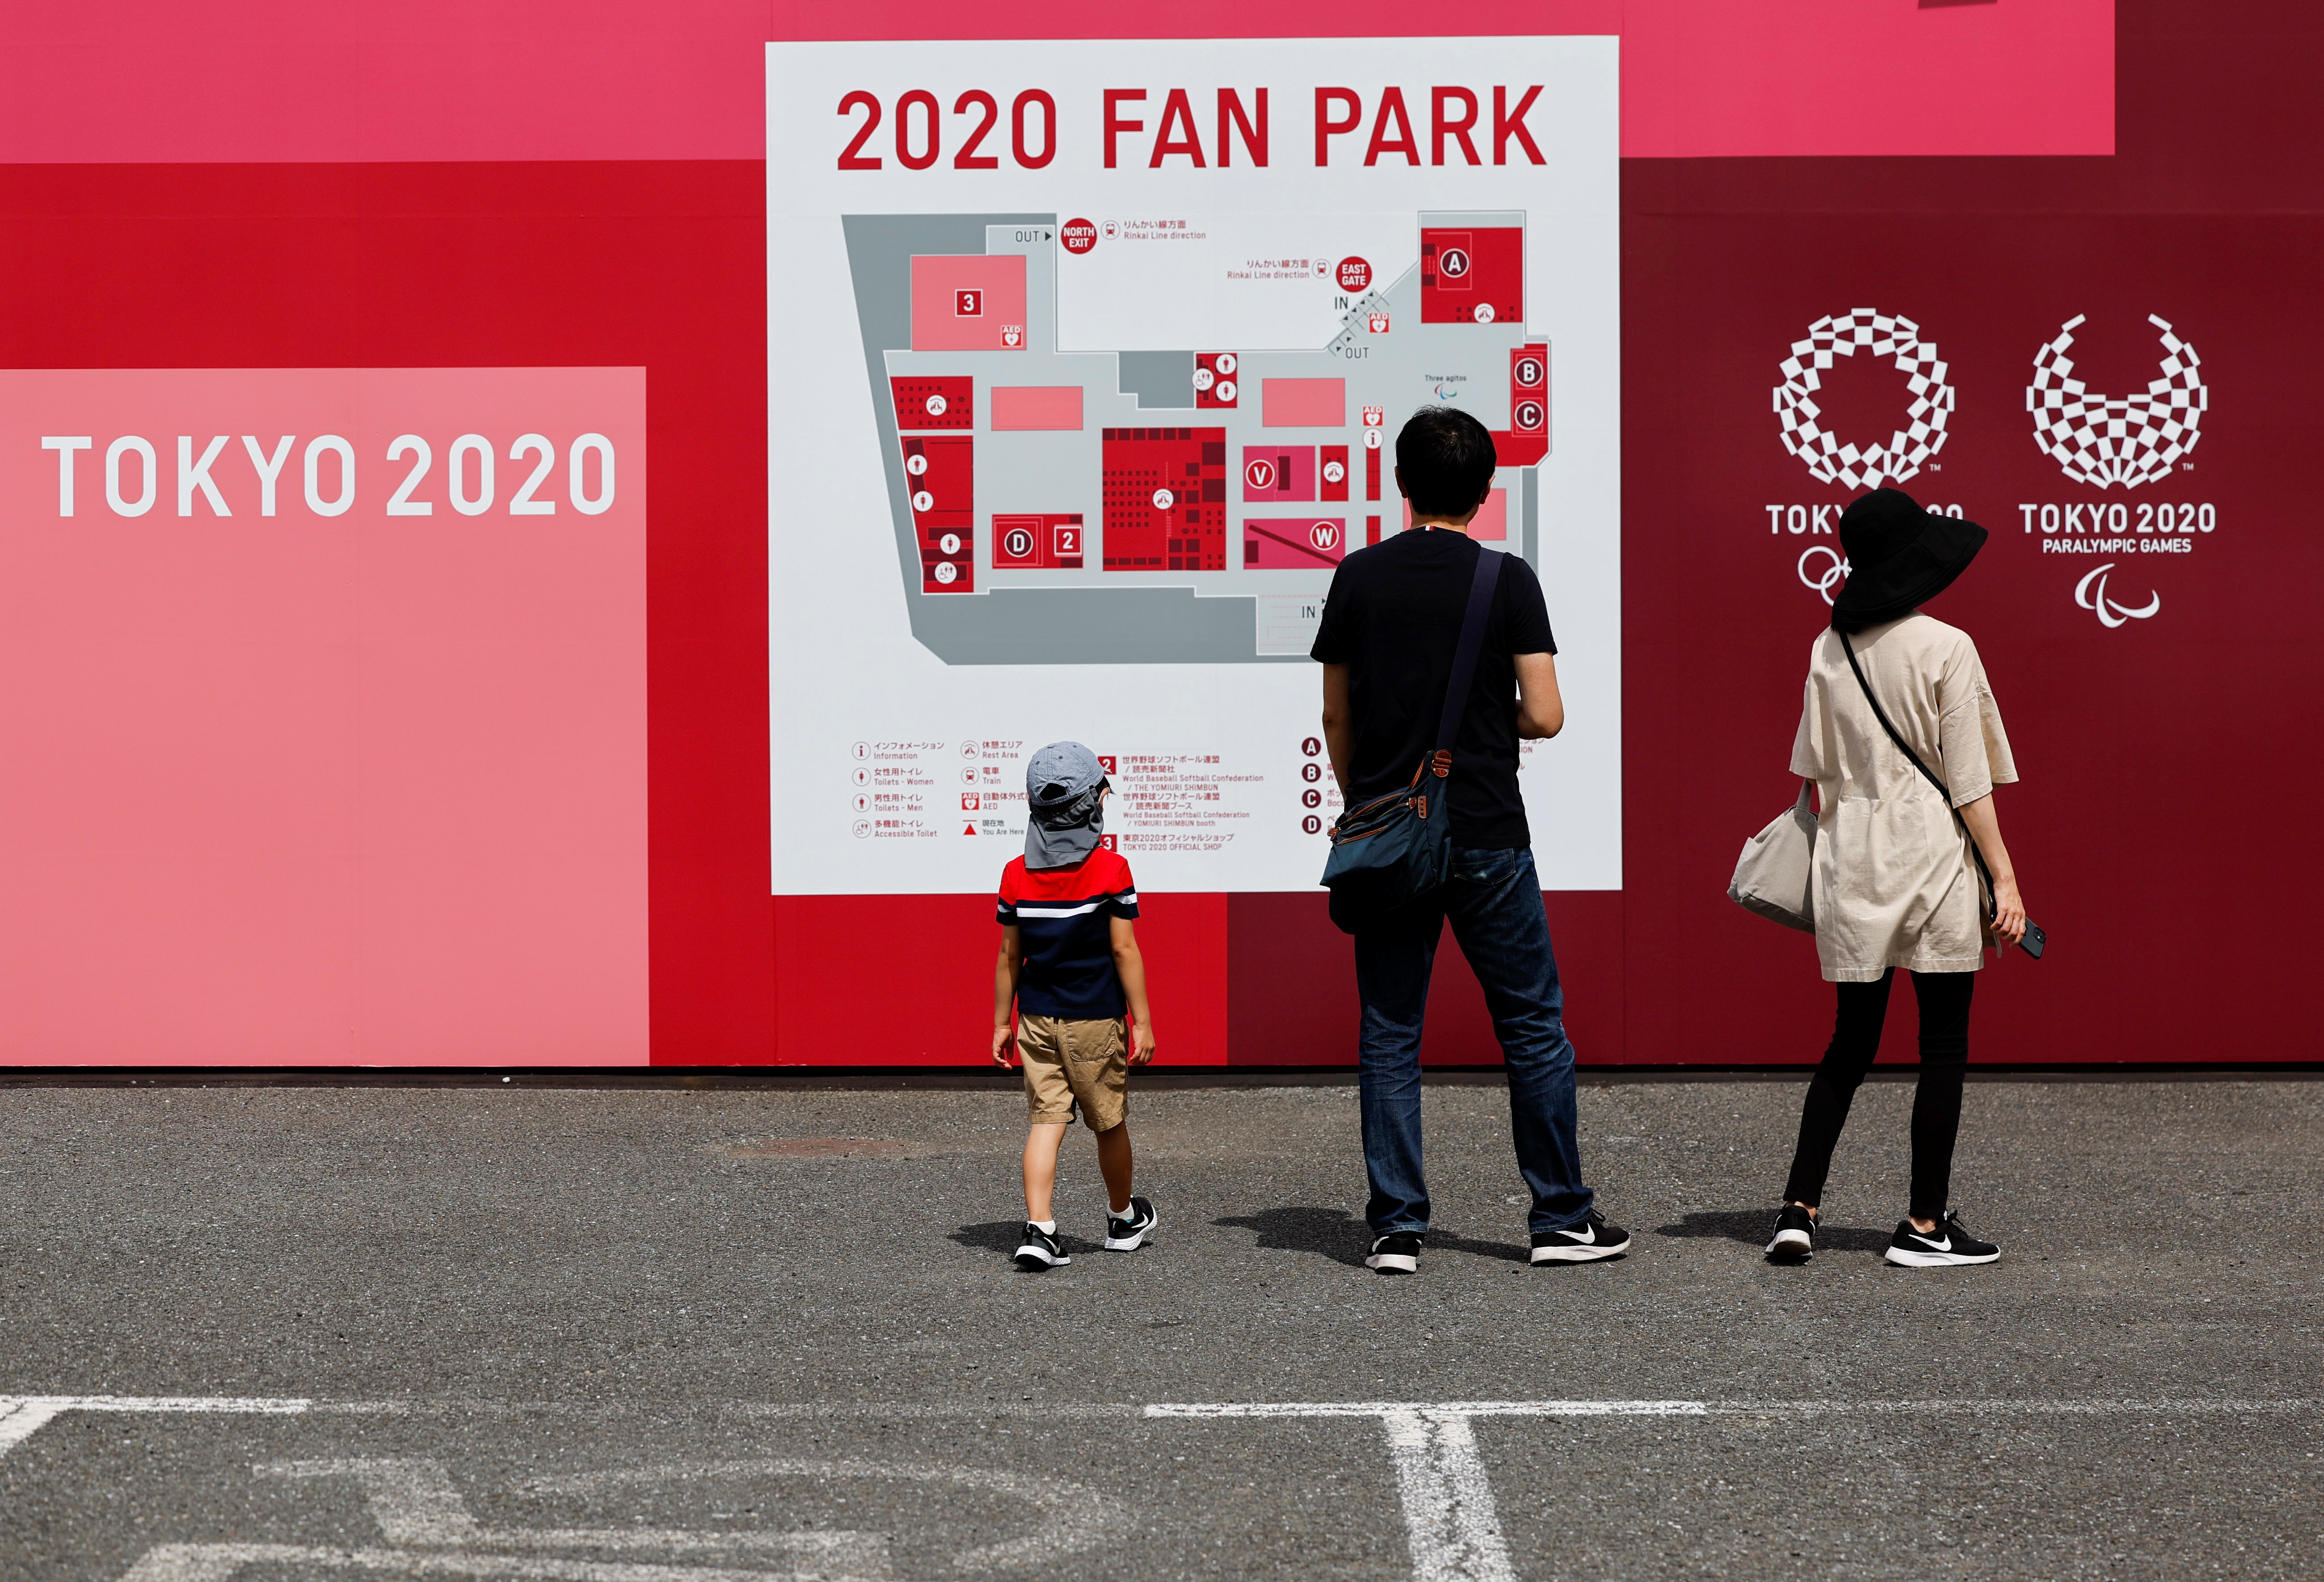 Visitors are seen at 2020 Fan Park, amid the coronavirus disease (COVID-19) pandemic, in Tokyo